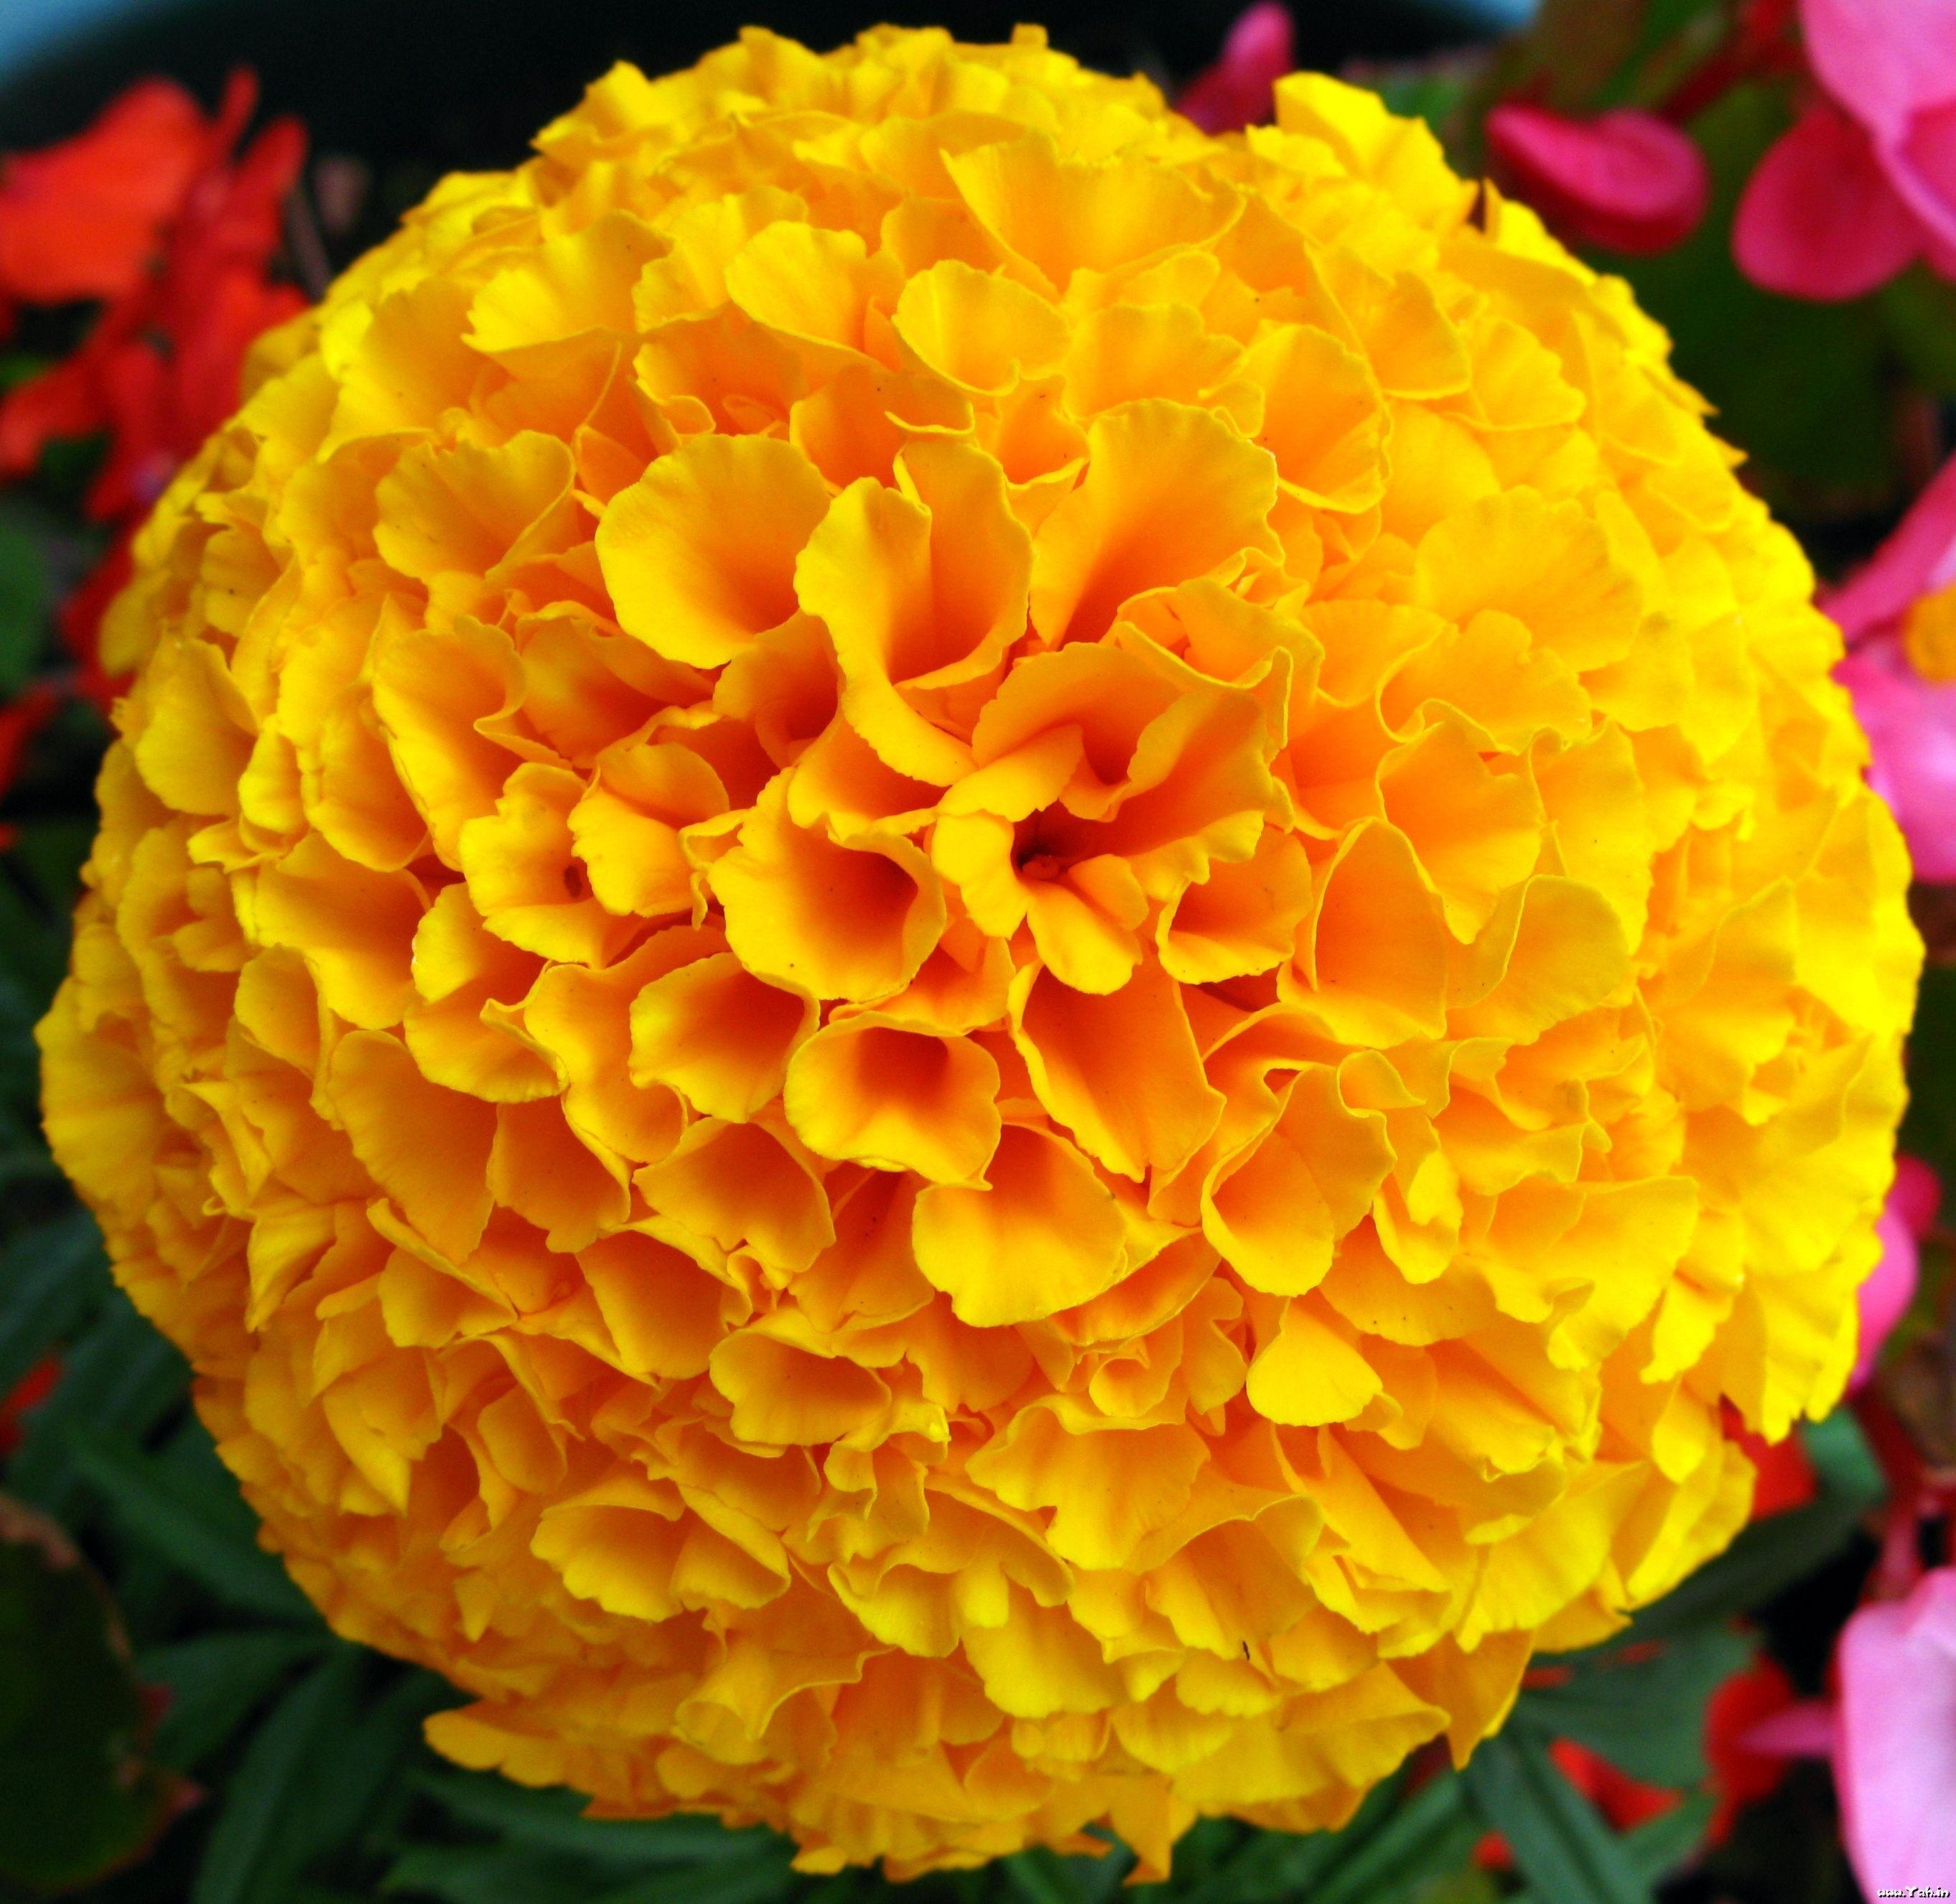 Marigold wallpaper. Flowers. image. Photo. Picture. HD